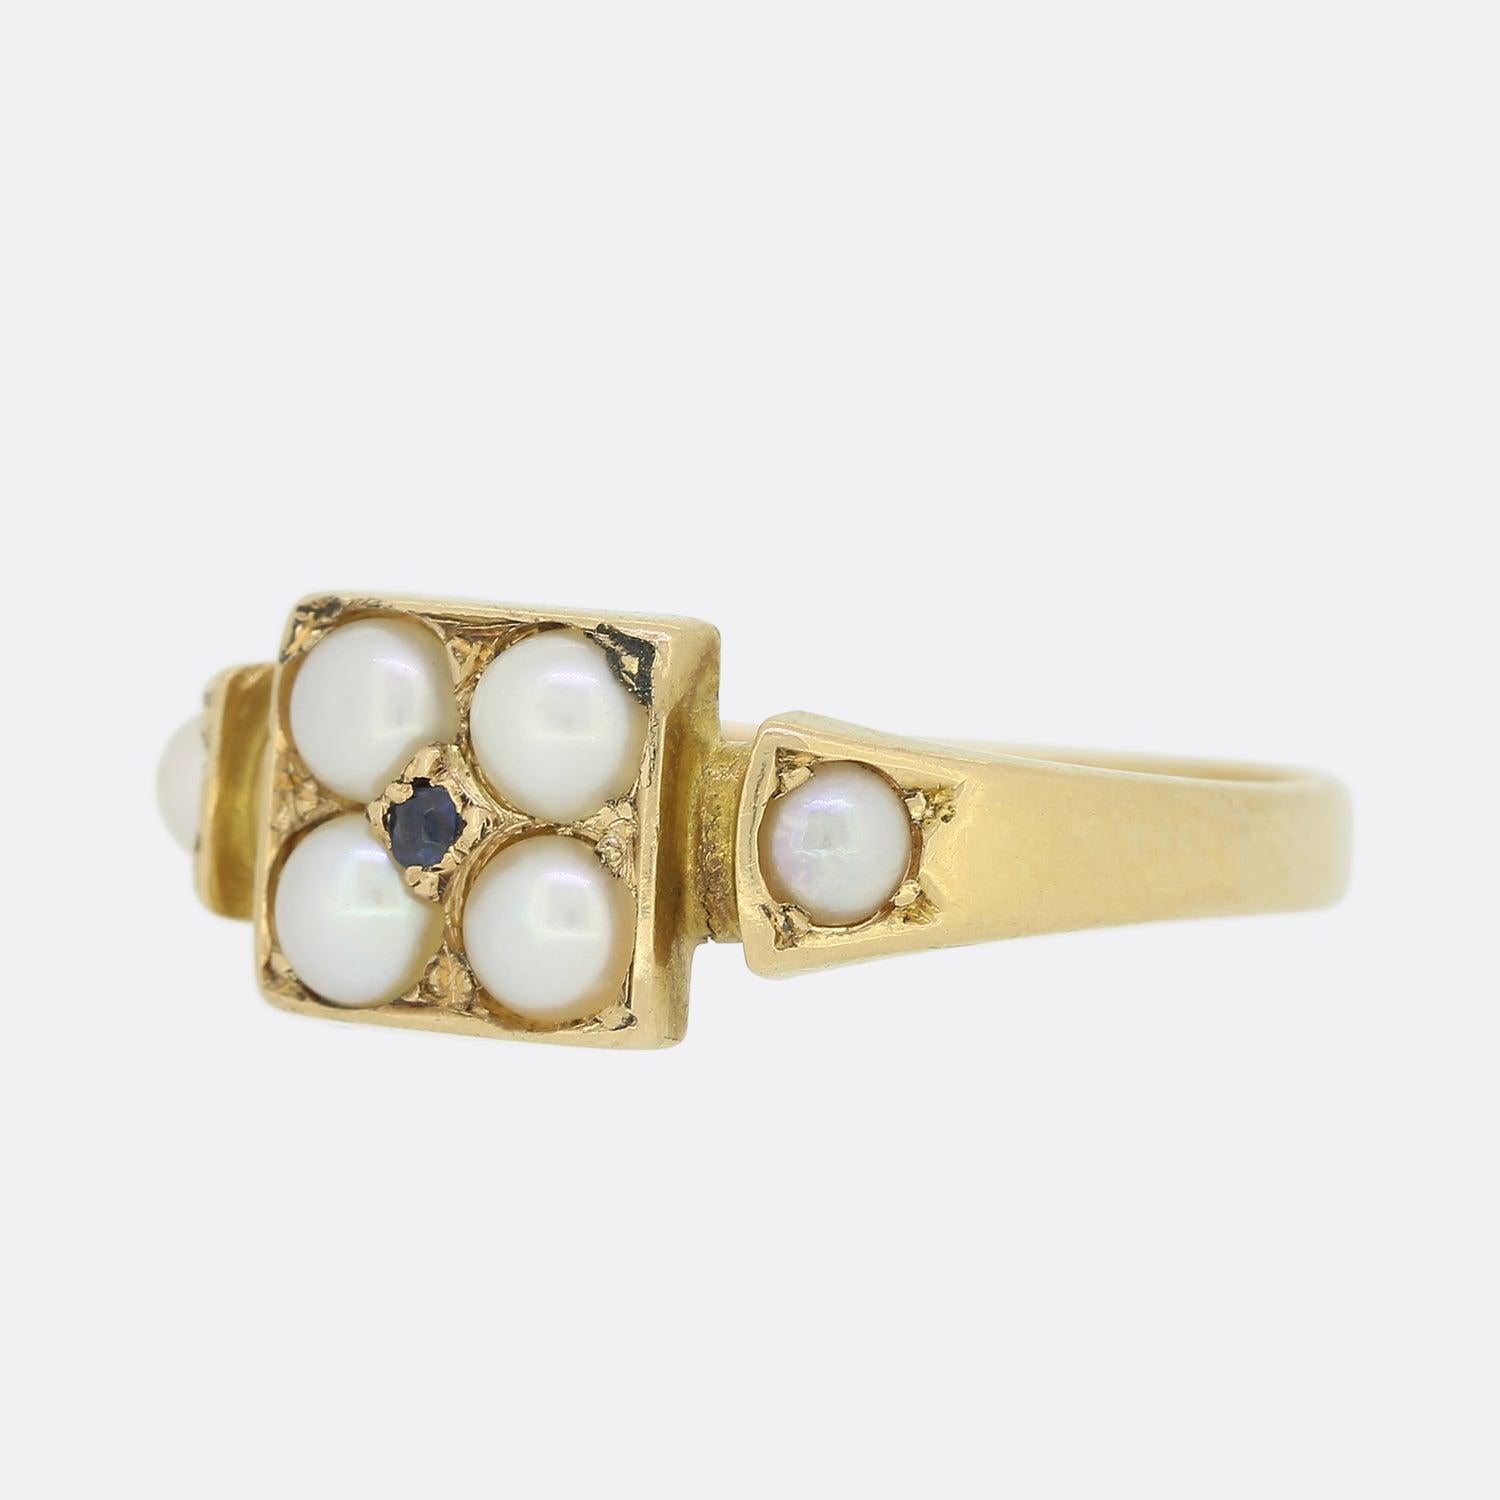 This is a wonderful 15ct yellow gold antique ring. Within a face crafted into the shape of a square sits four sizeable round pearls; one in each corner with a single deep toned sapphire being centrally claw set.  The piece is finished with shoulders